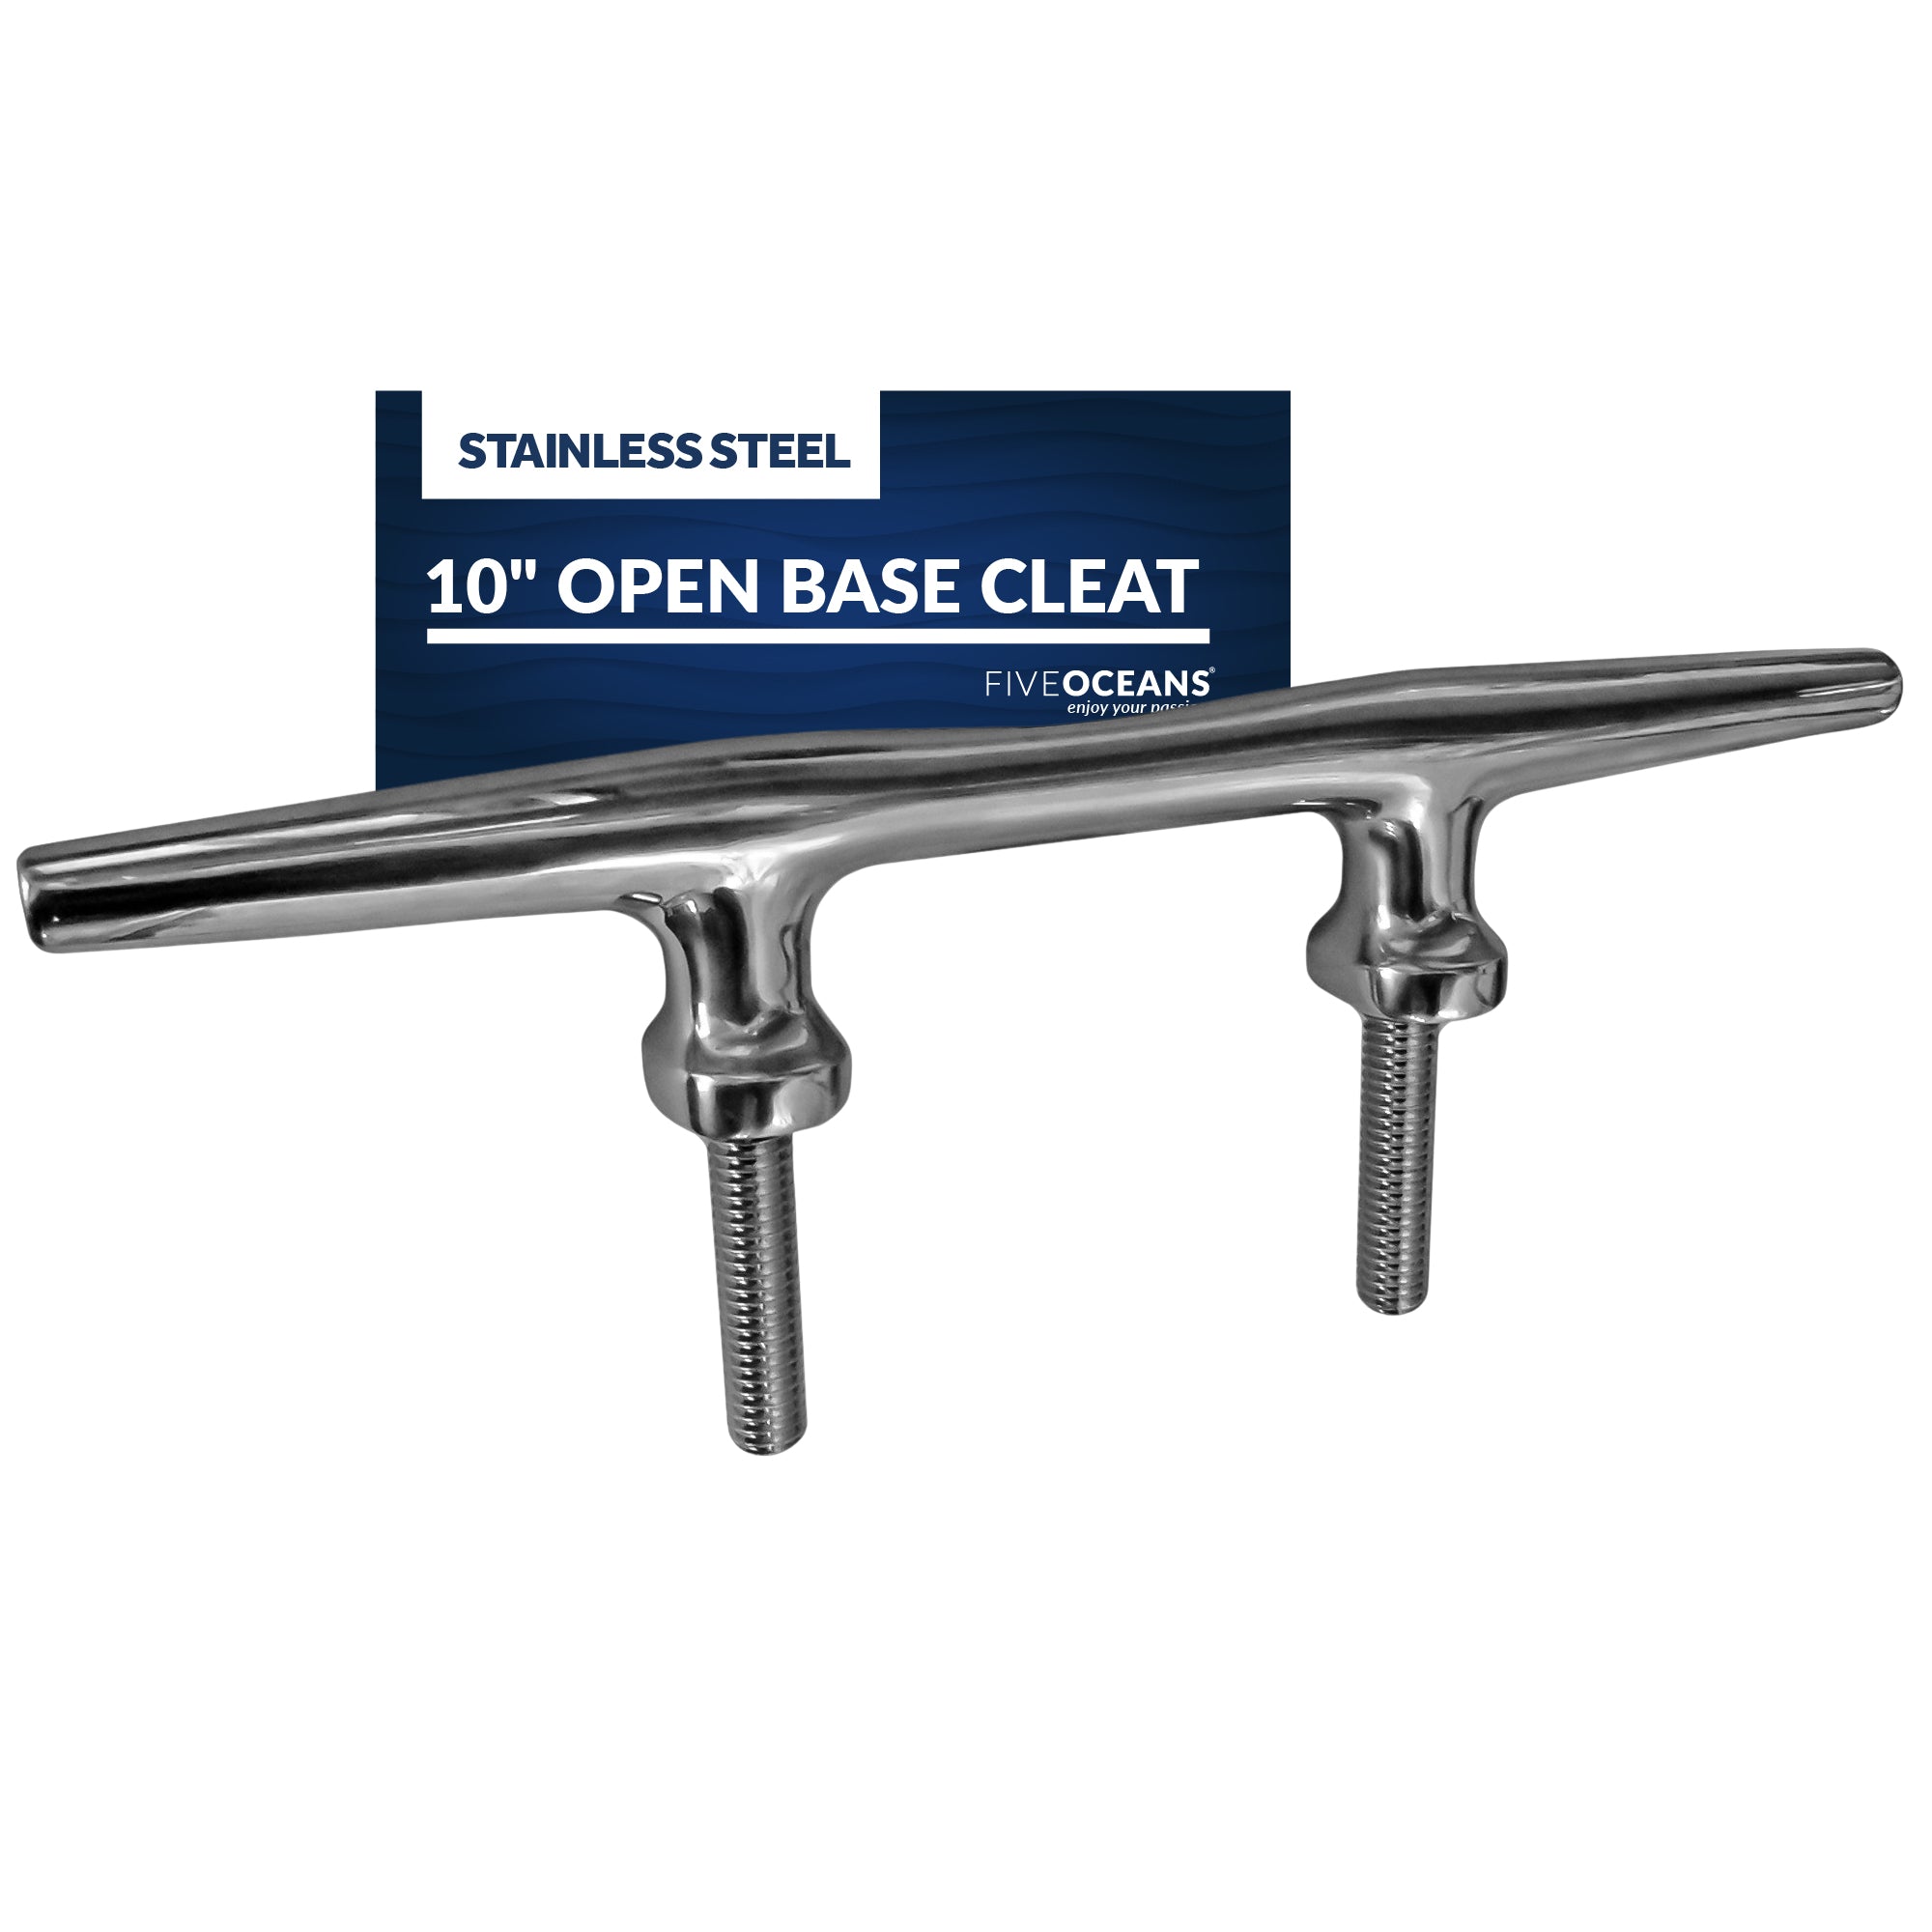 Open Base Cleat 10", Stainless Steel - FO2994